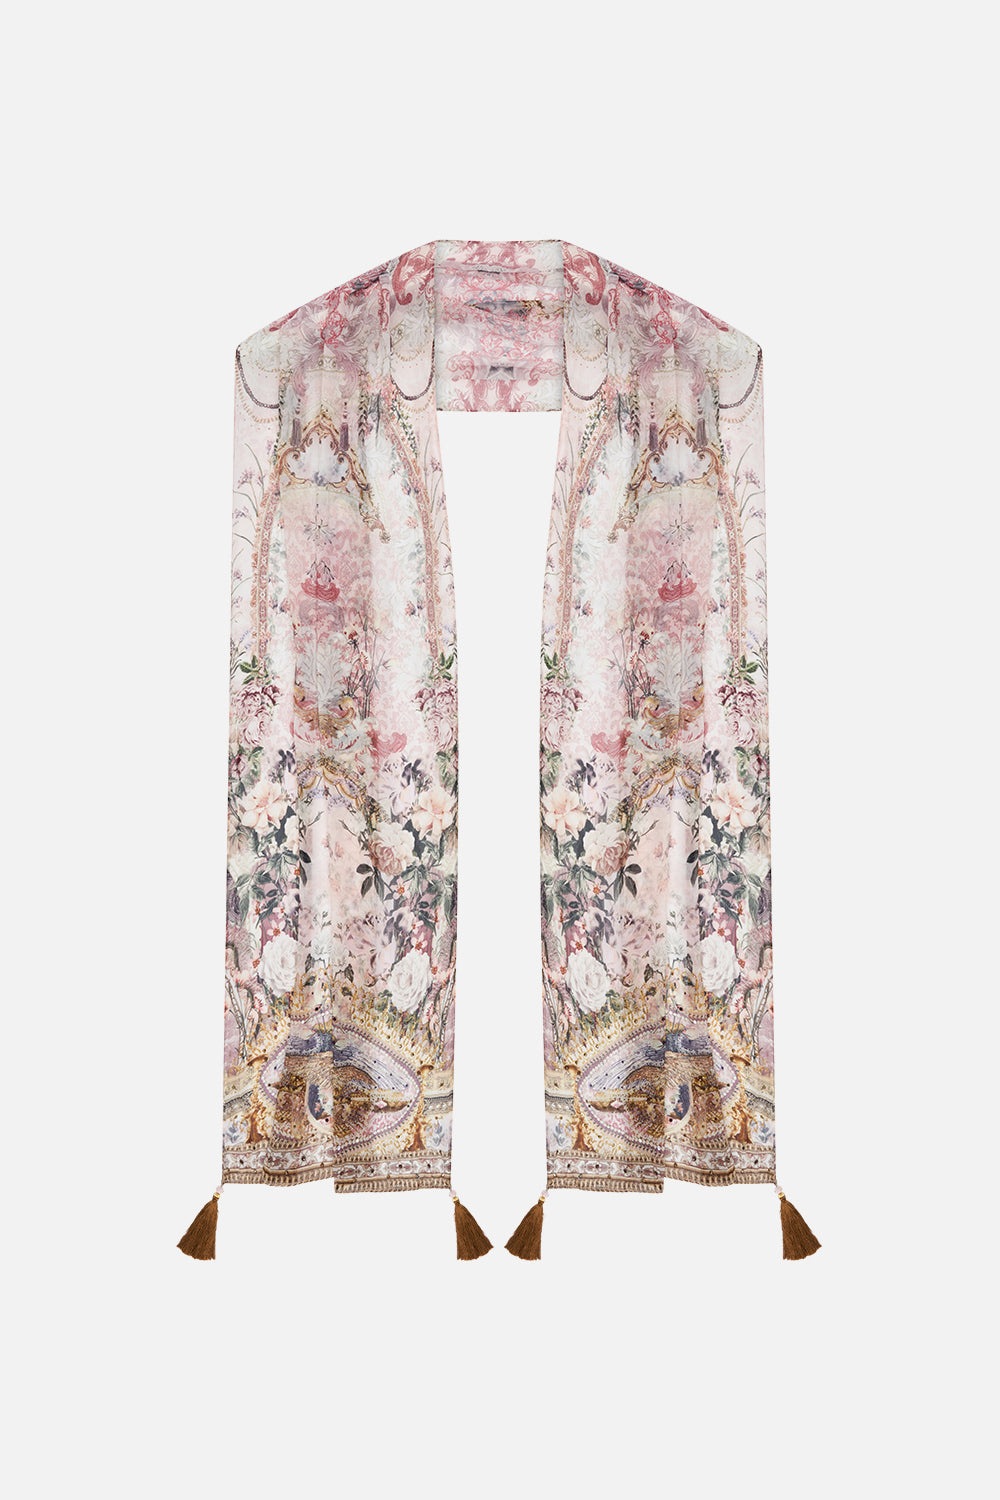 Product view of CAMILLA floral long silk scarf in Kissed By The Prince print 